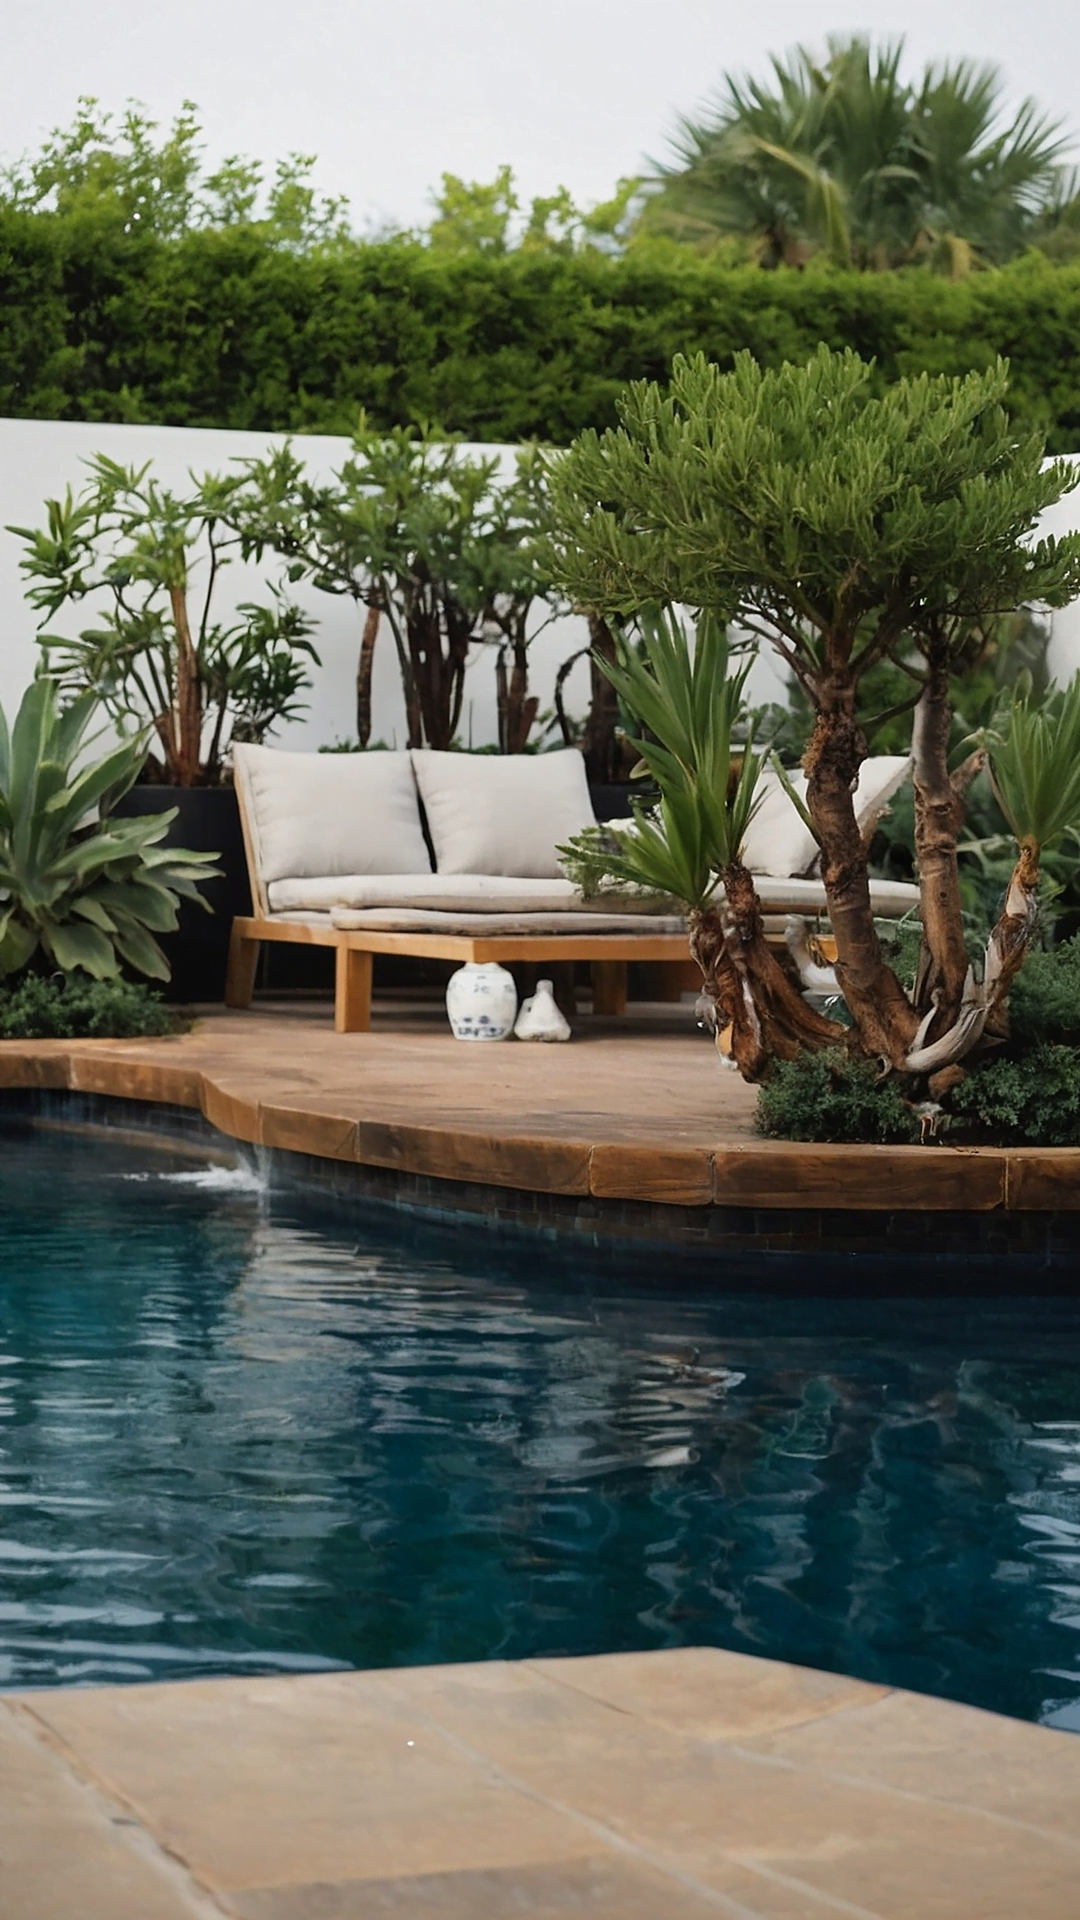 A Medley of Greens: Plants that Complement Pool Blues